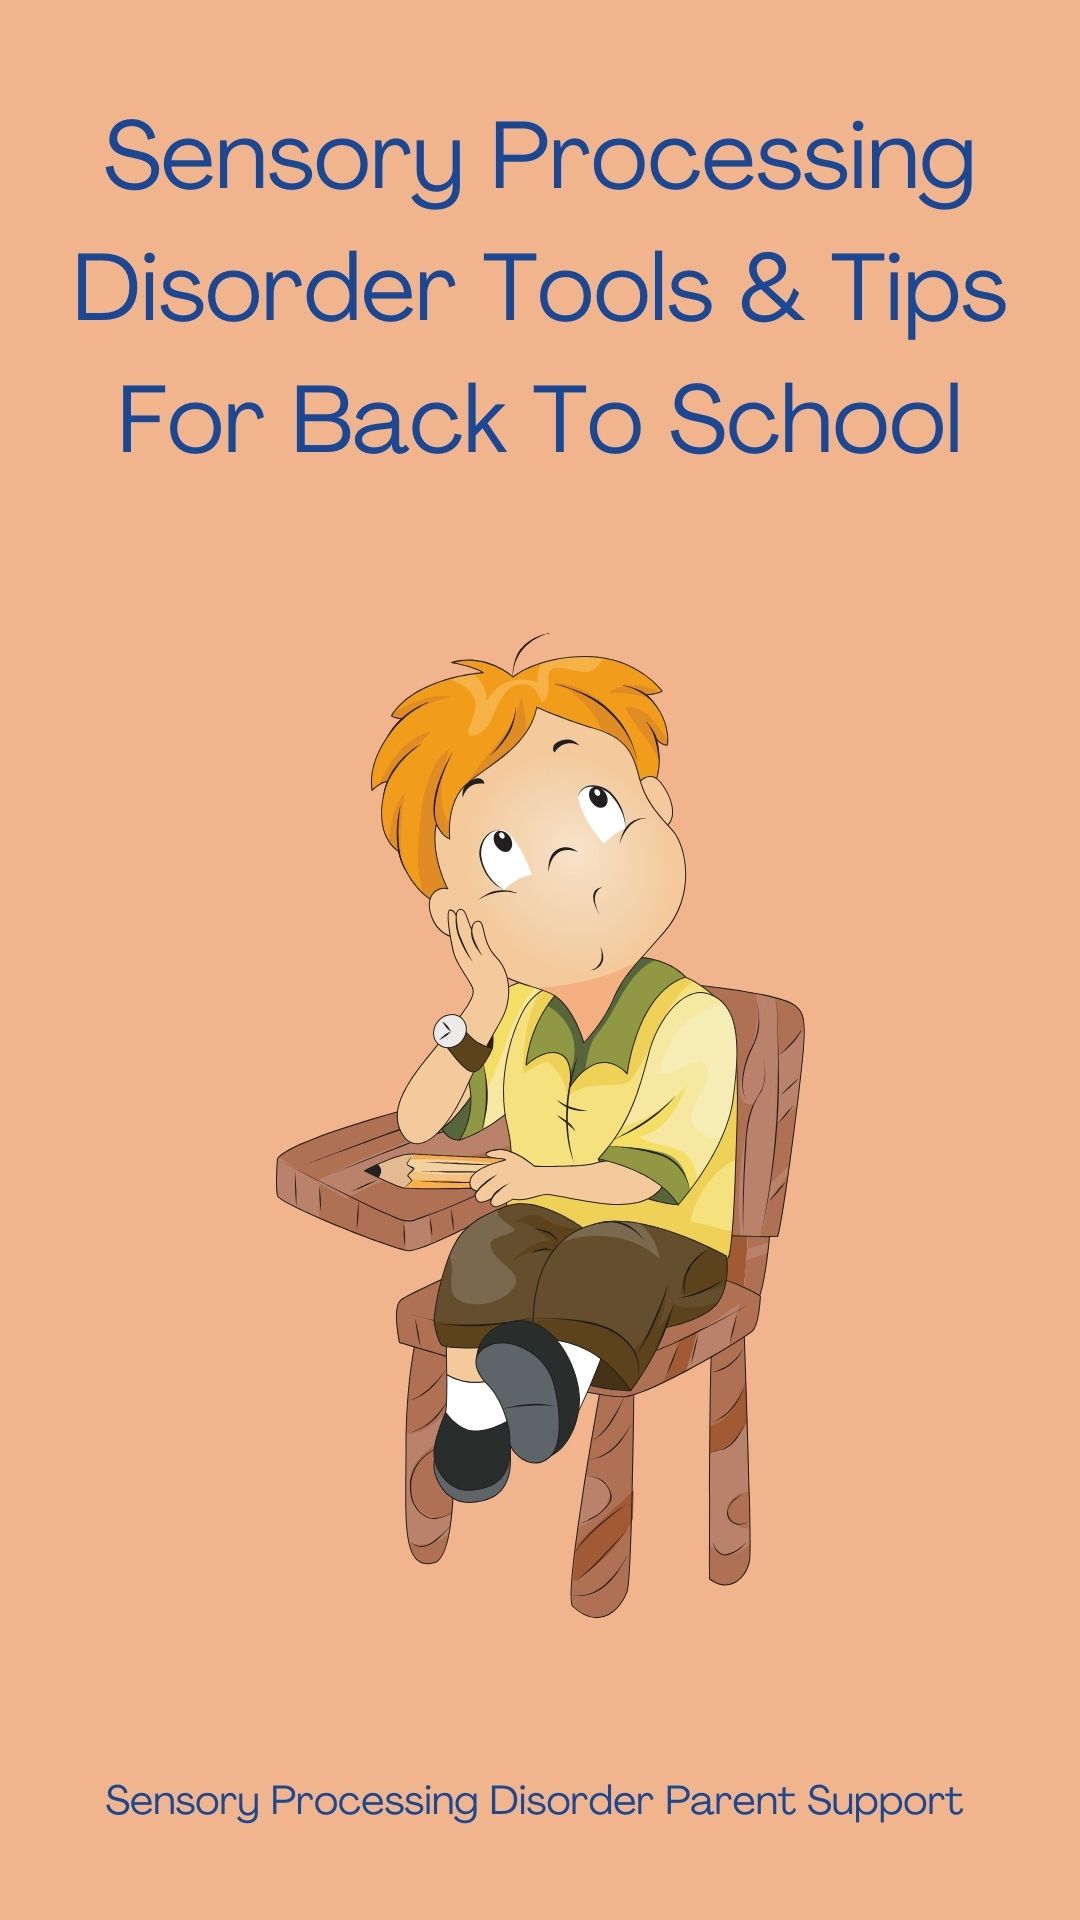 Sensory Processing Disorder Tools & Tips For Back To School